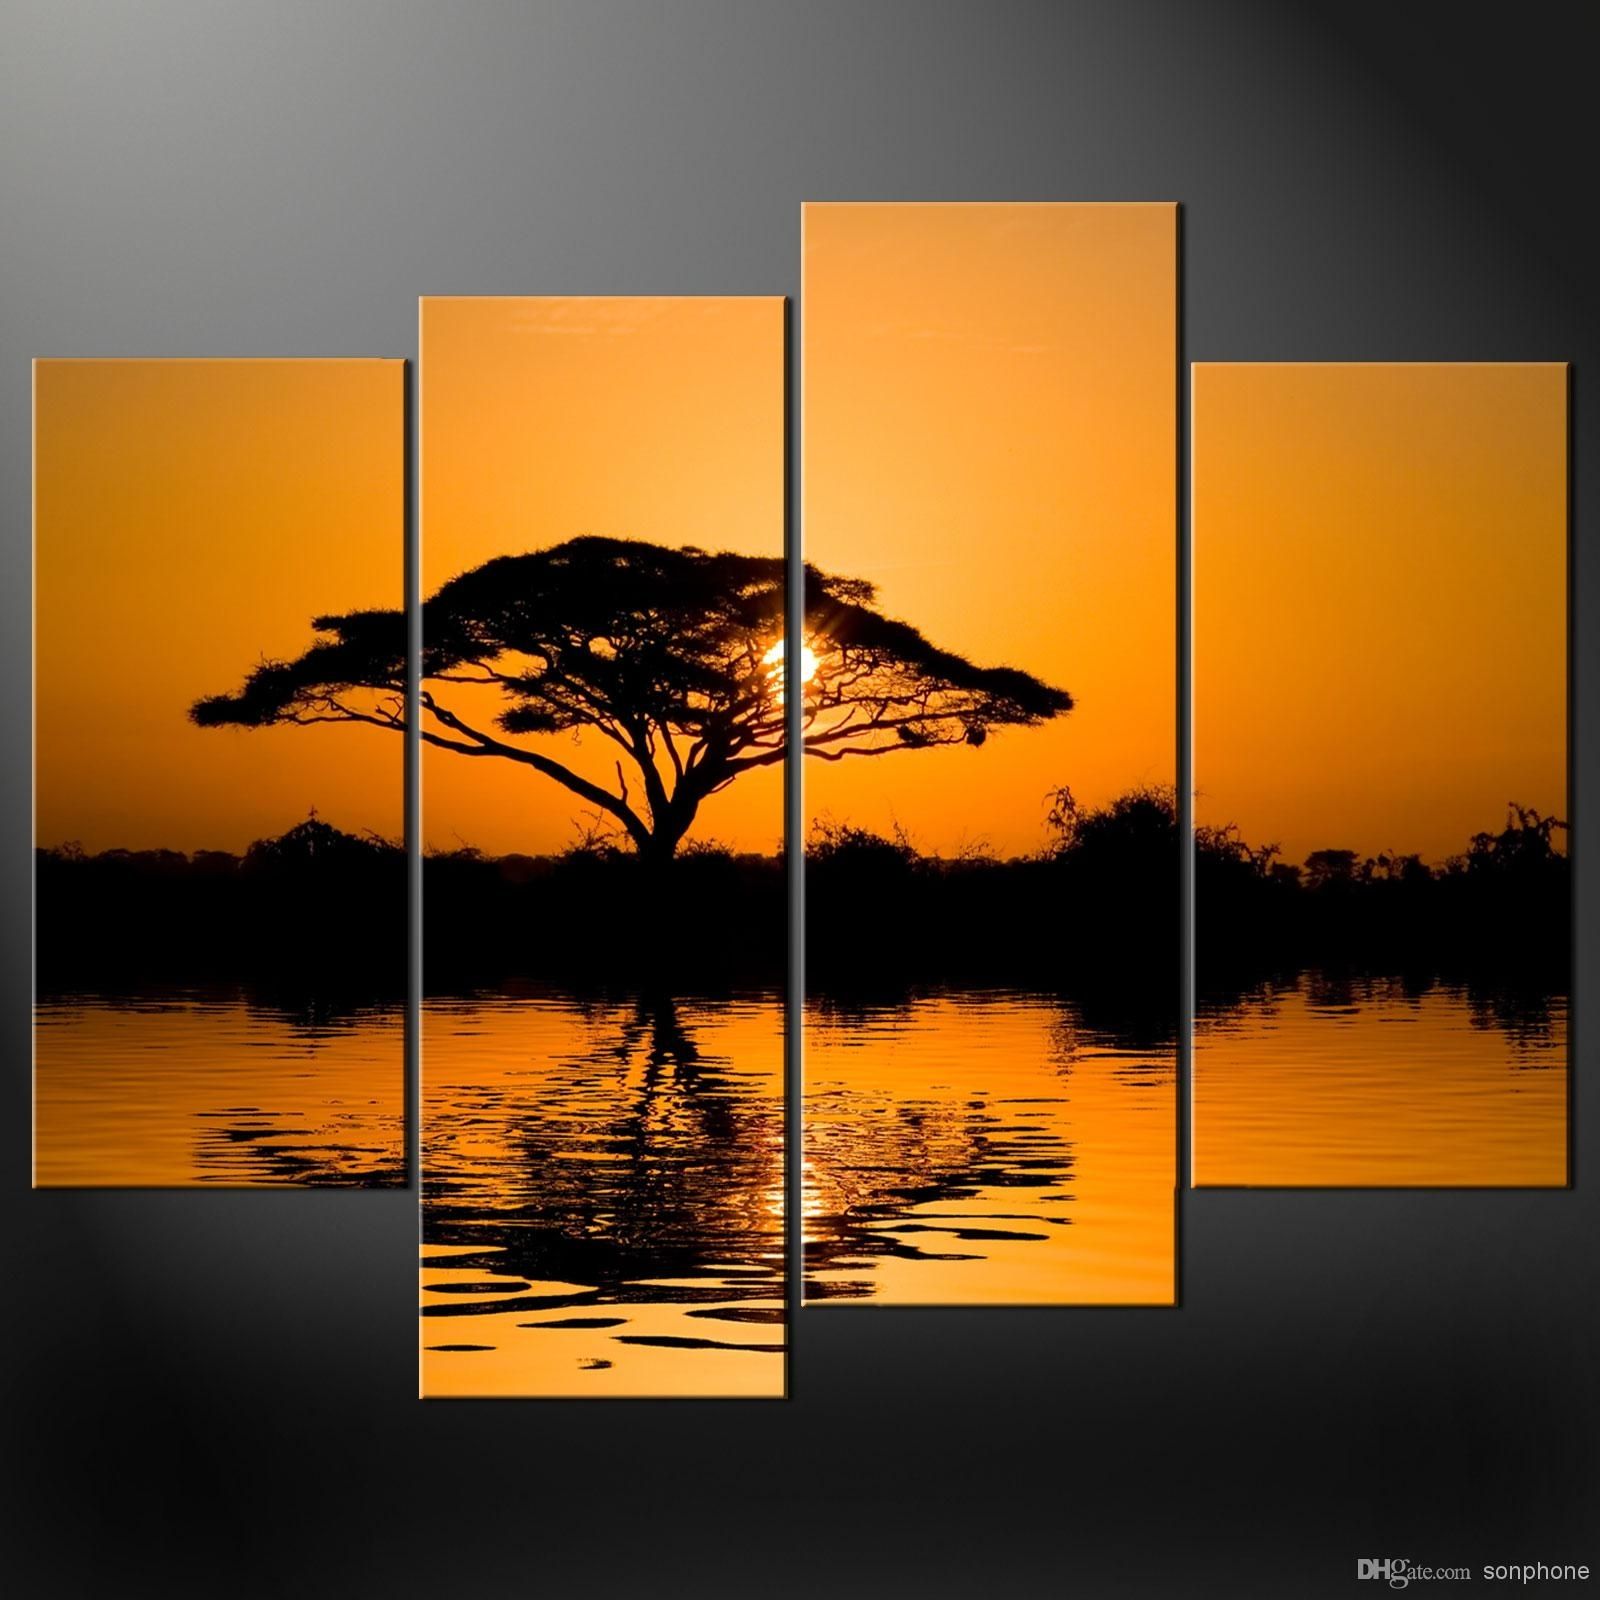 Framed 4 Panel Large African Wall Art Decor Modern Sunset Oil Intended For Panel Wall Art (View 5 of 20)